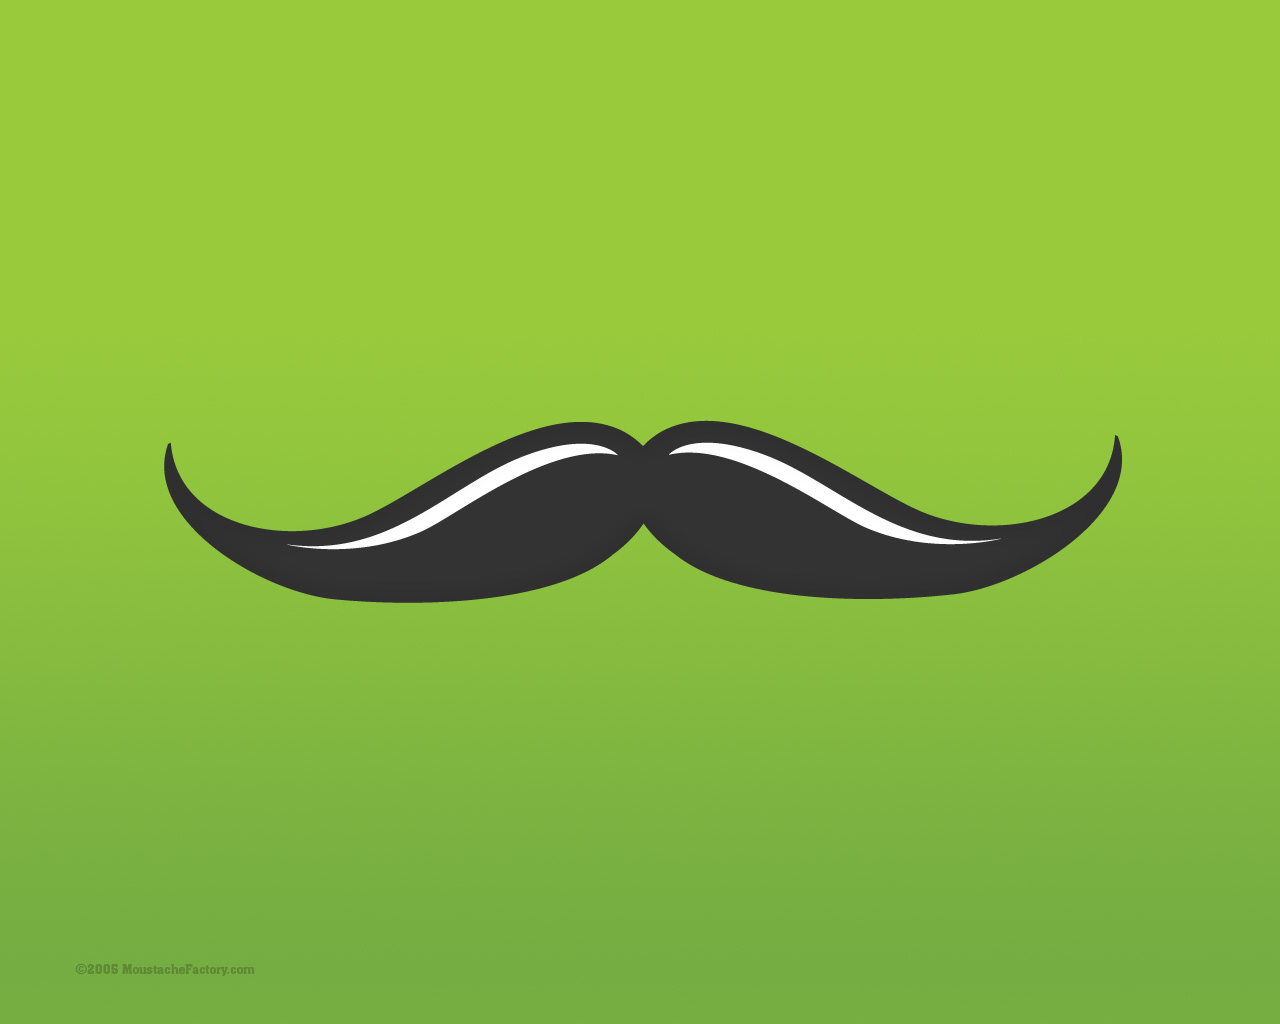 Moustache Wallpaper Looking For